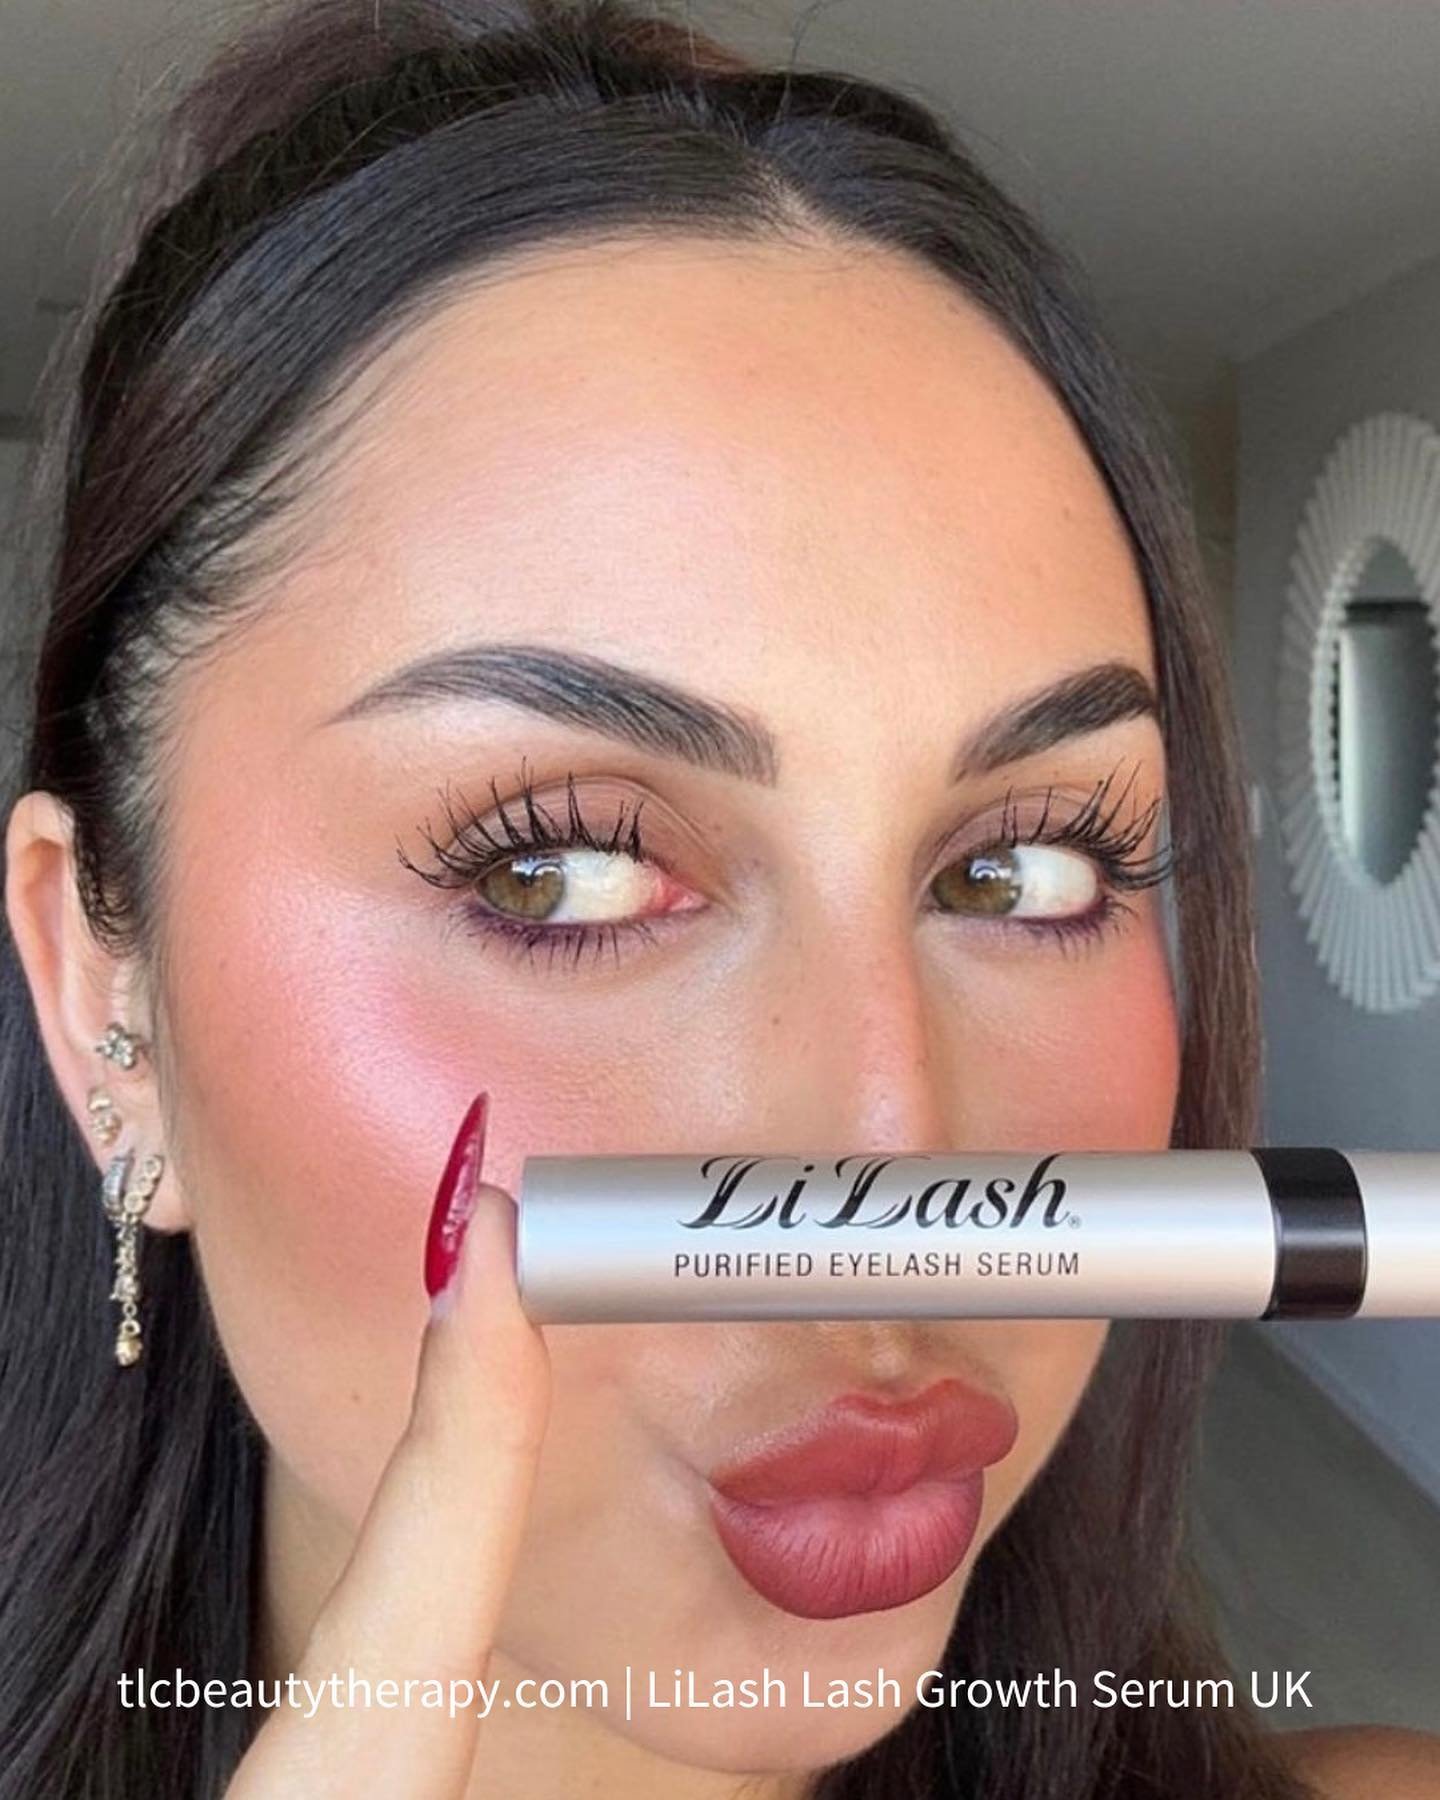 &ldquo;LiLash will forever and alwavs be my number 1&rdquo; ❤️ @haileerehua 

How about you?

It&rsquo;s amazing how much more confident you feel with longer, natural lashes. Once you&rsquo;ve added LiLash Purified Eyelash Serum to your beauty routin